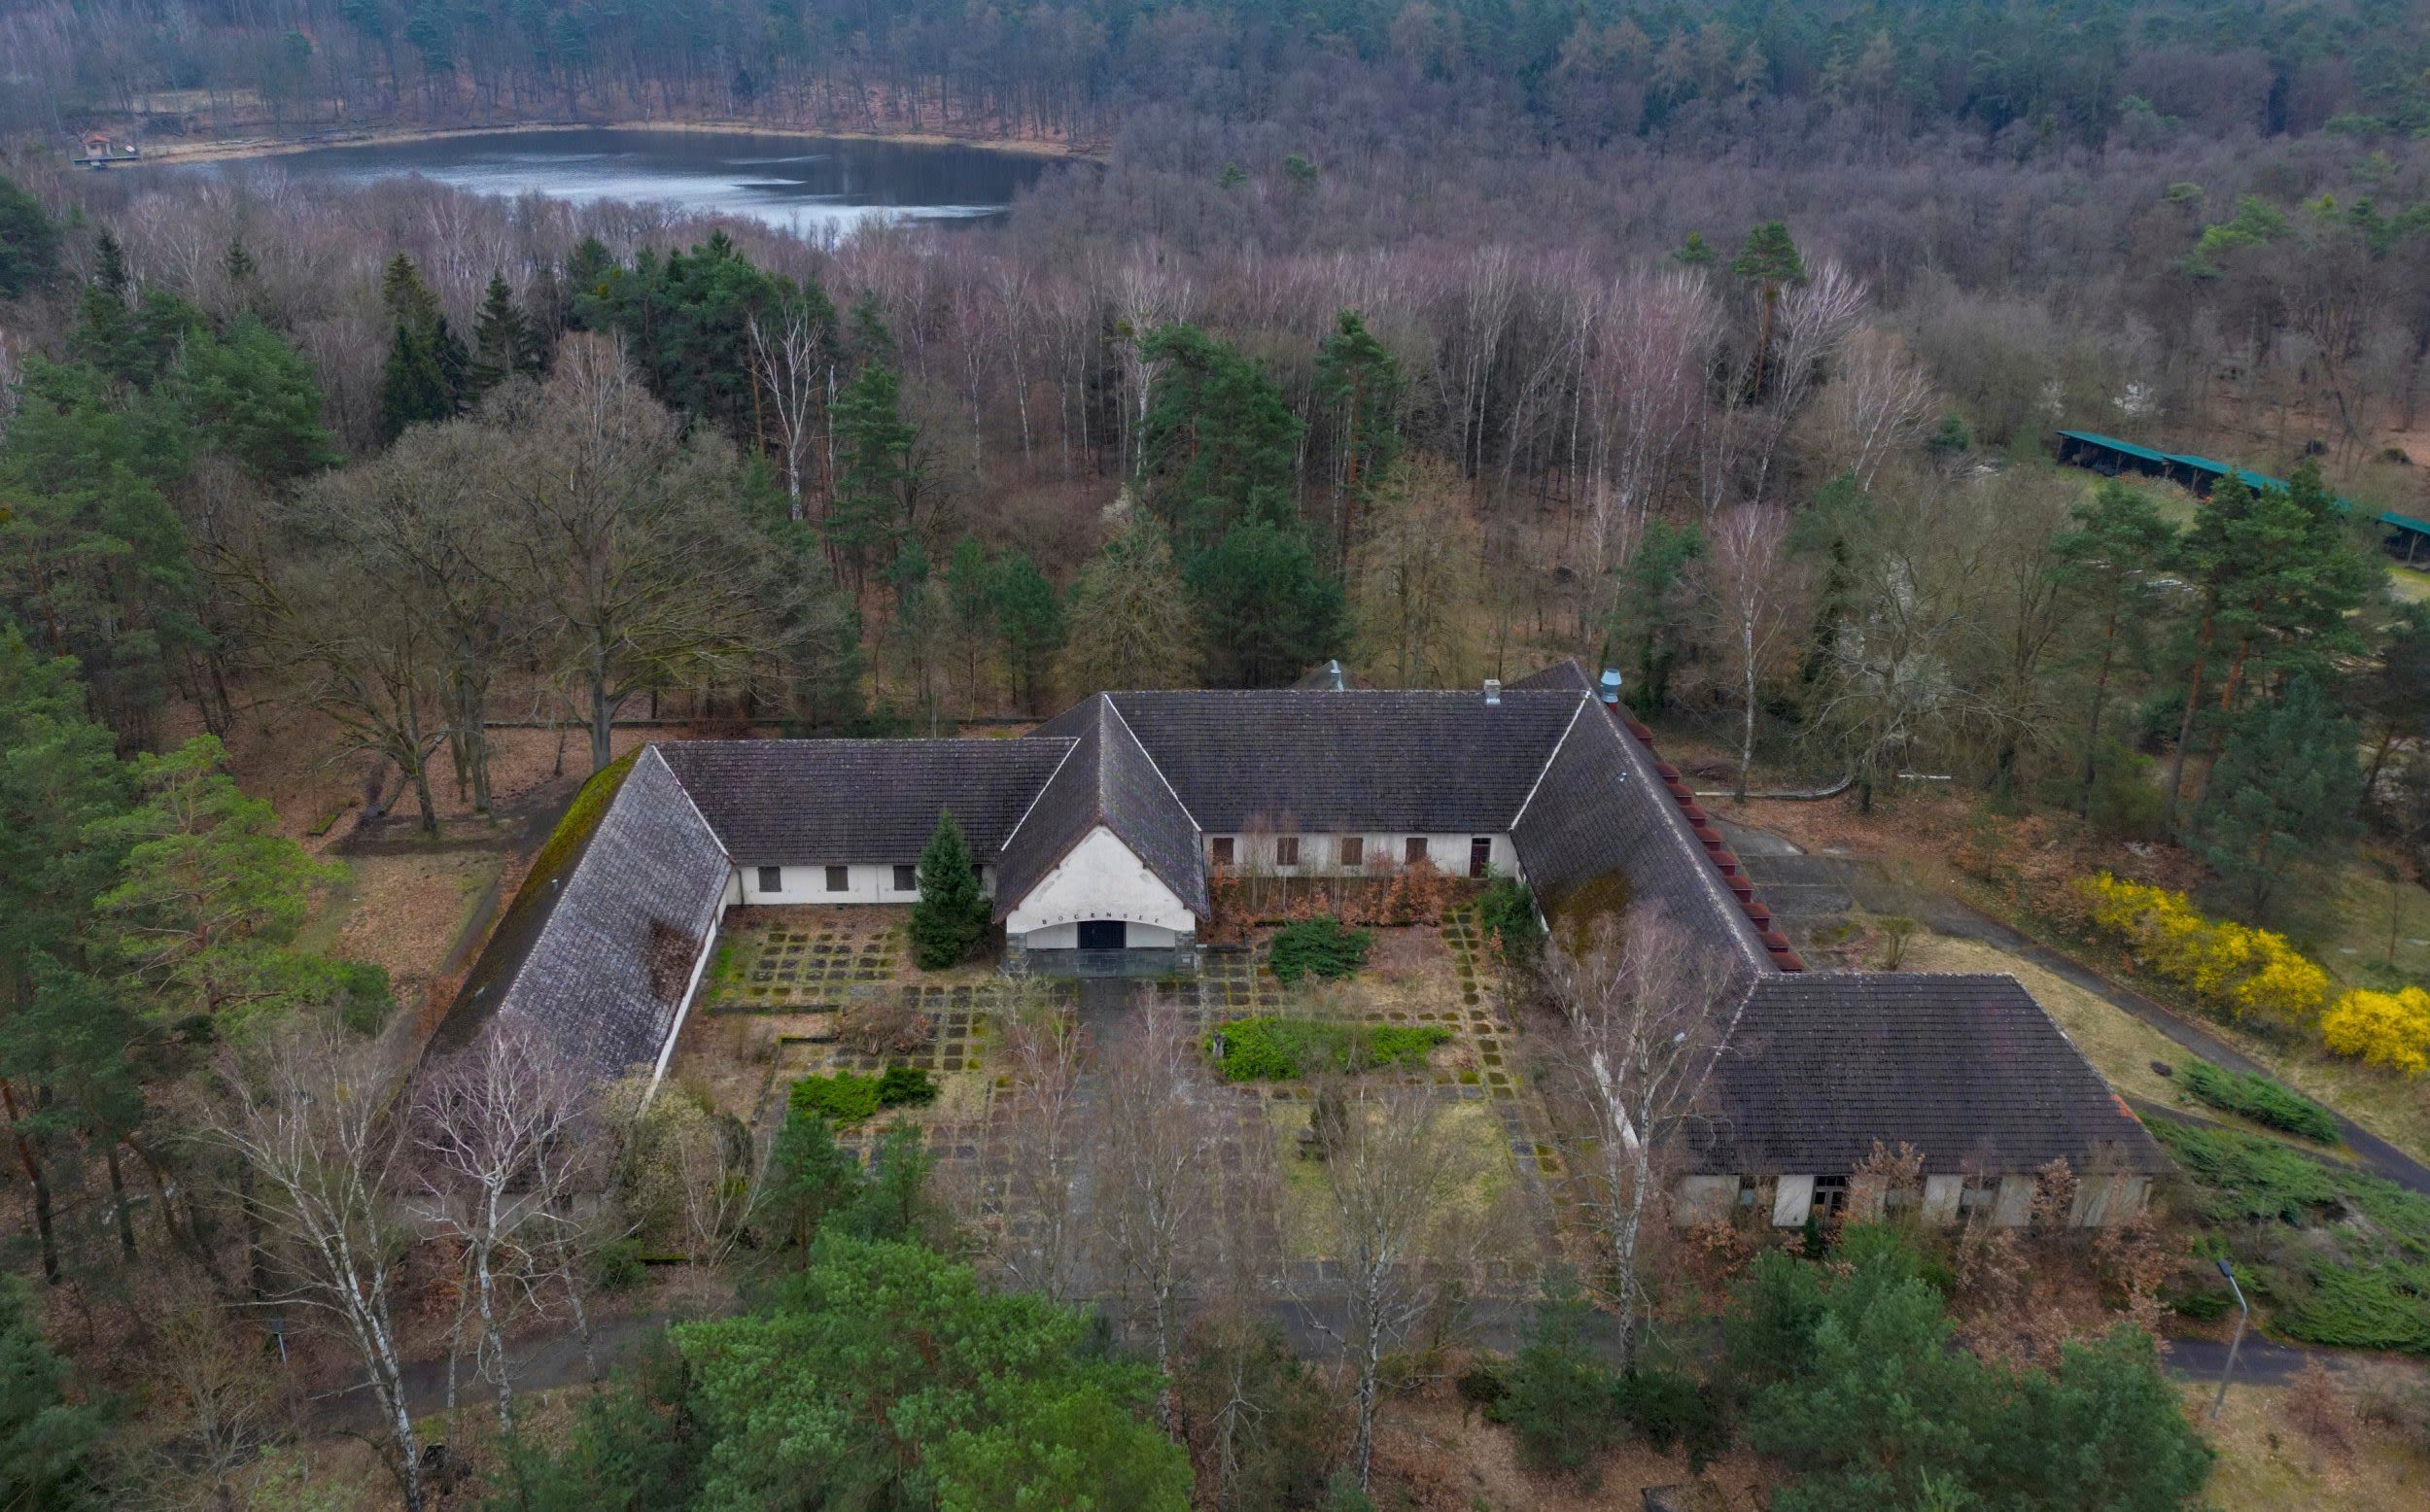 Joseph Goebbels’s unwanted lakeside love nest offered up for free